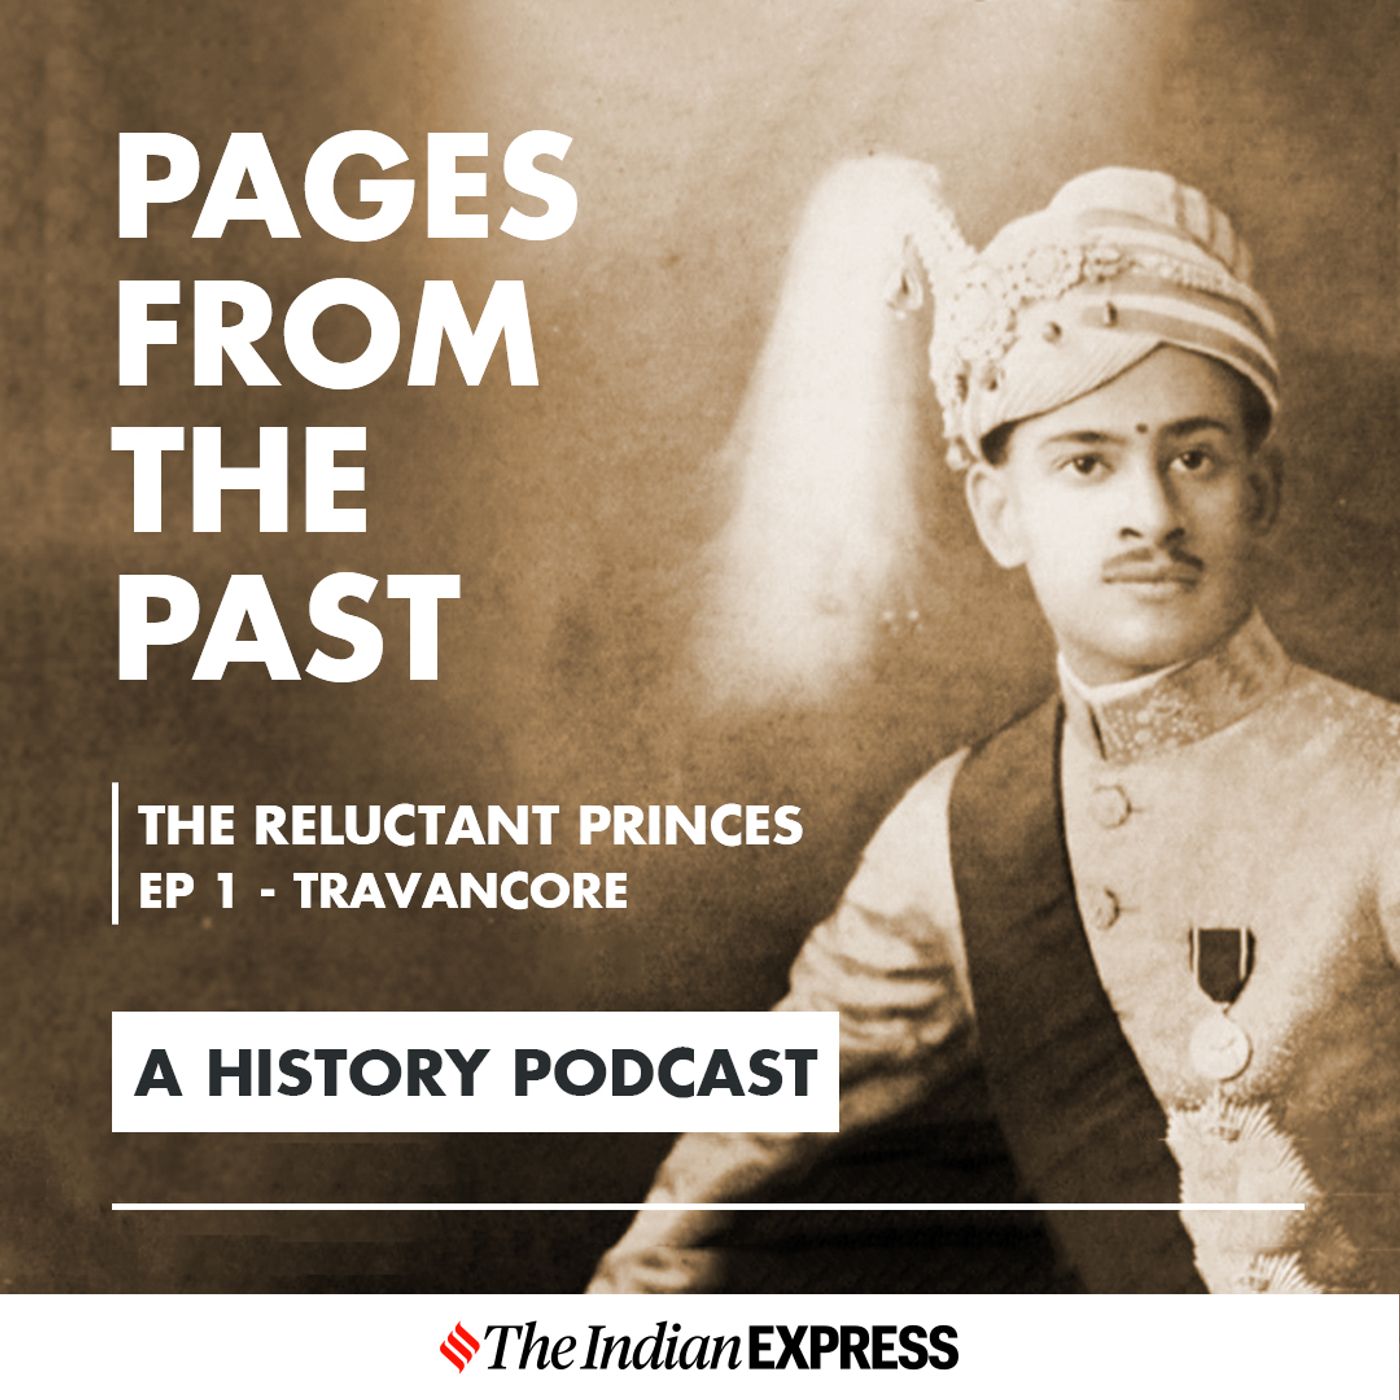 Introducing Pages from the Past: The Reluctant Princes